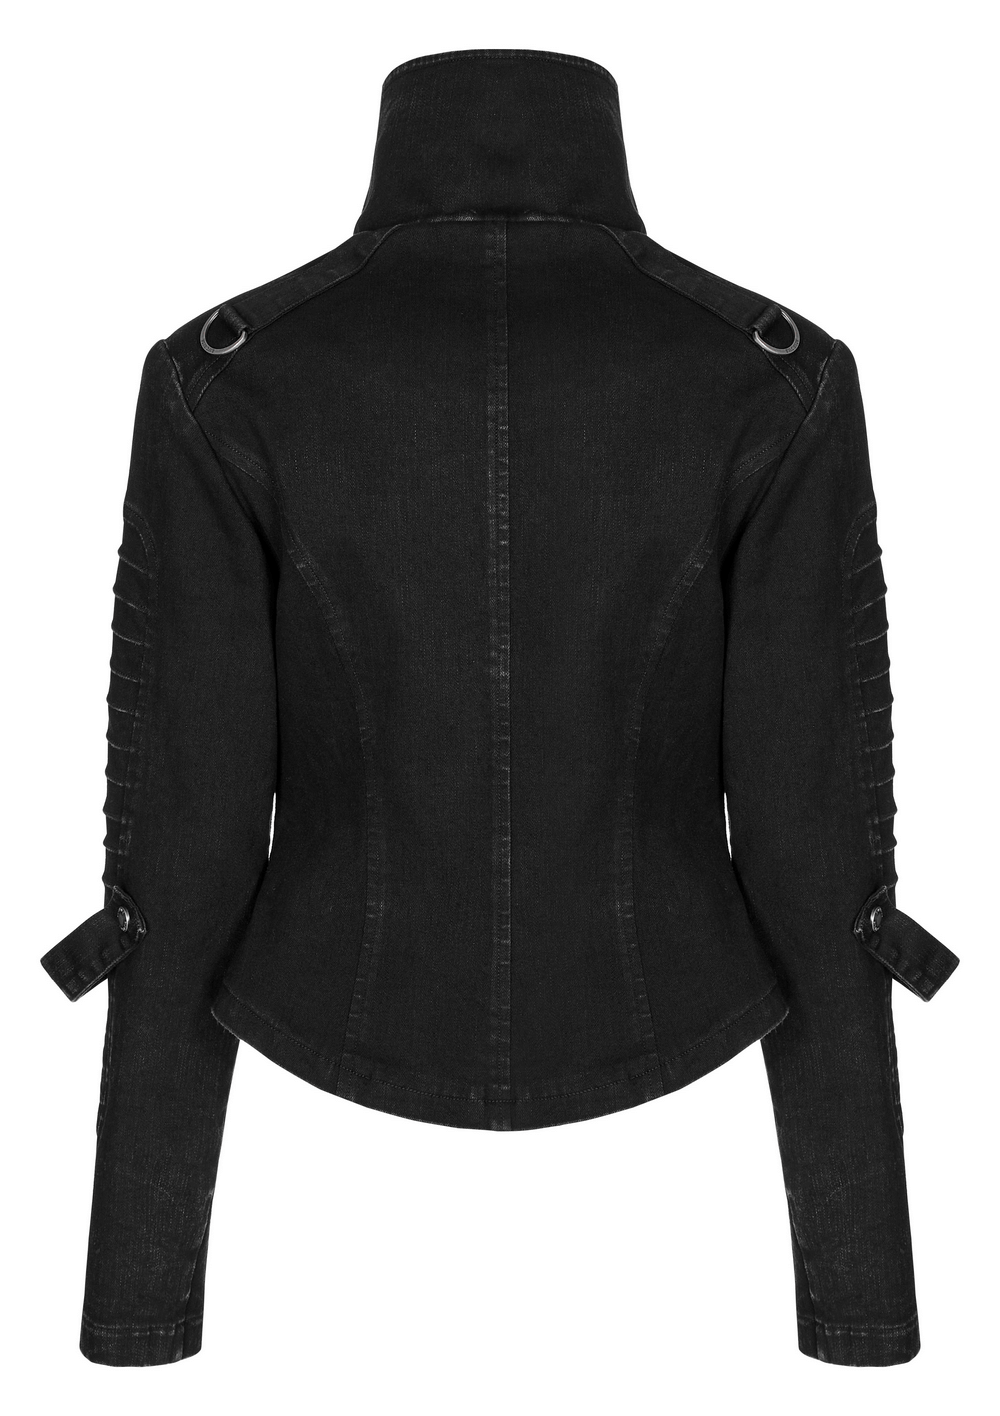 Gothic Female Fitted Denim Jacket with Edgy Detailing - HARD'N'HEAVY